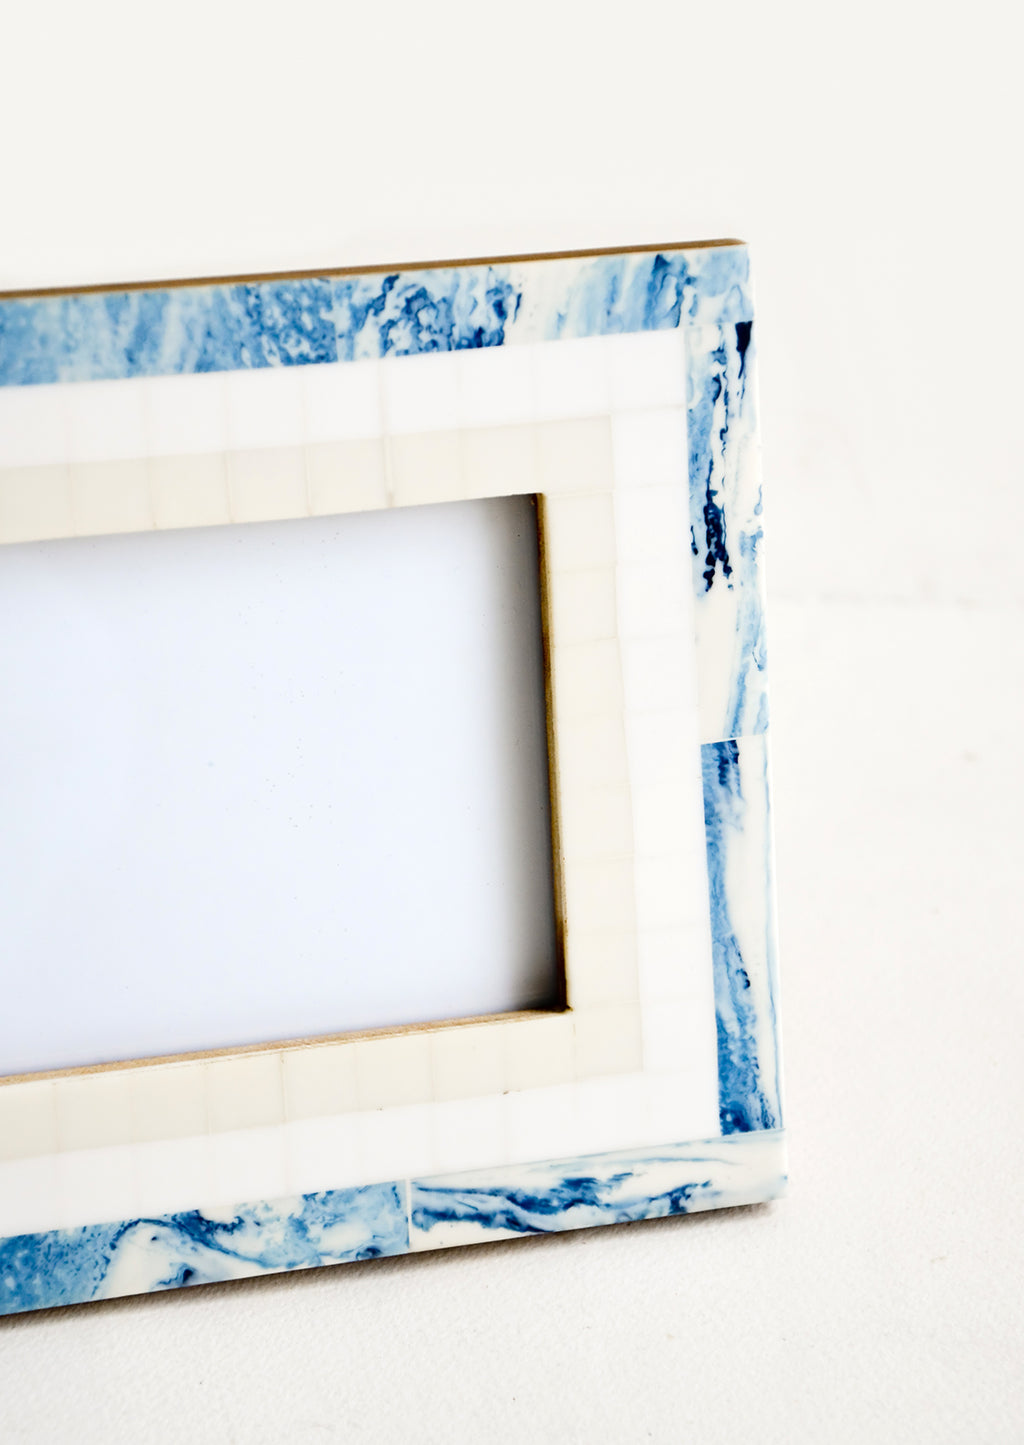 2: A tiled border in blue, white and cream around a decorative photo frame.